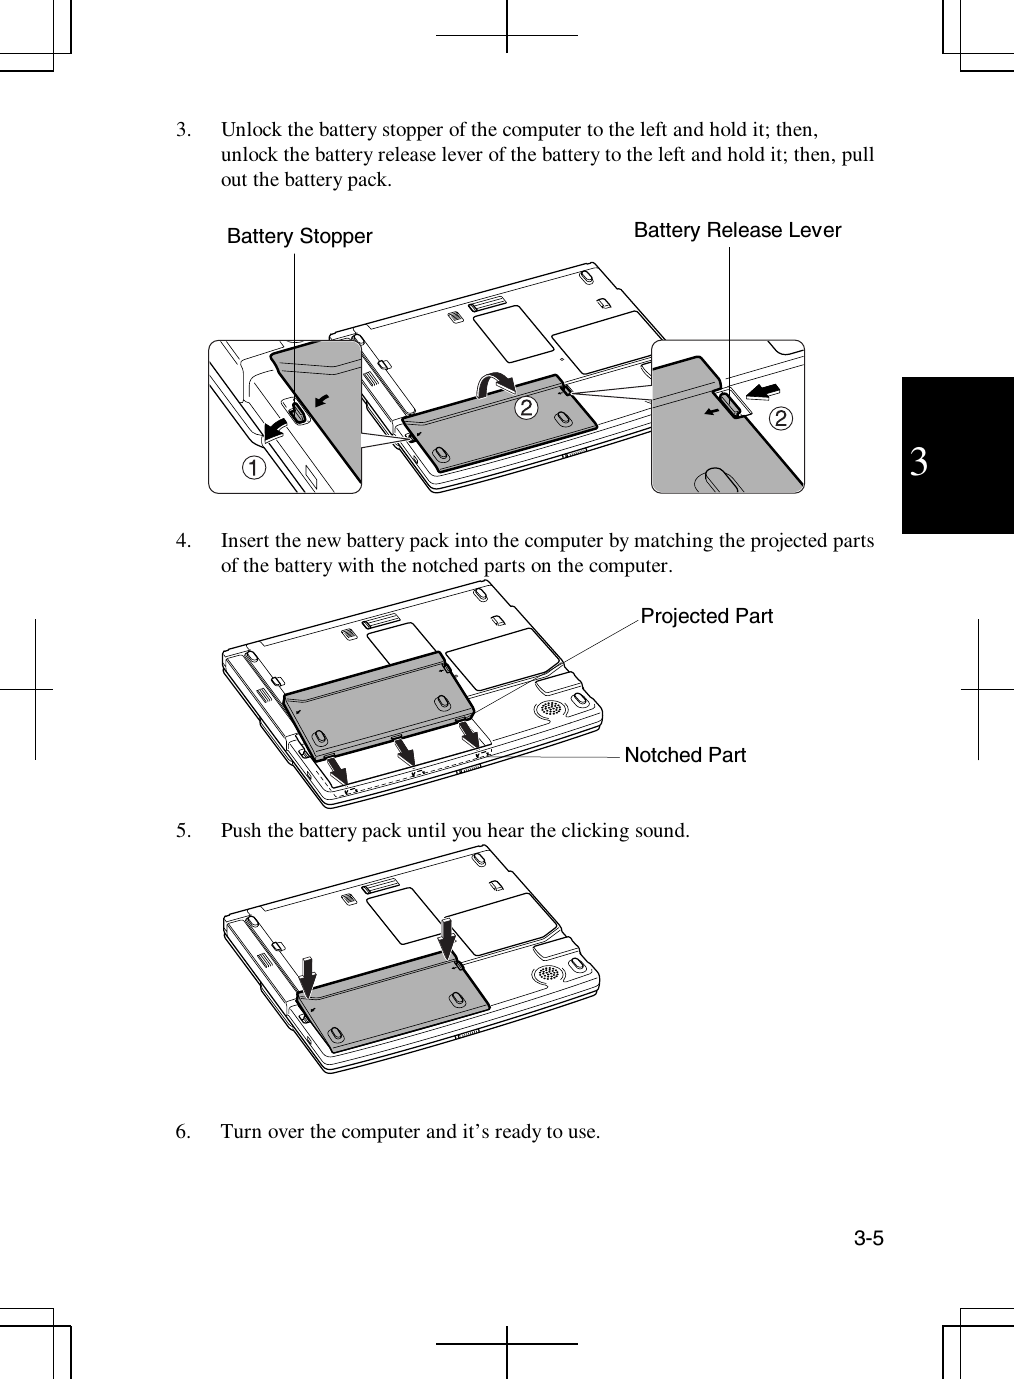 3-533. Unlock the battery stopper of the computer to the left and hold it; then,unlock the battery release lever of the battery to the left and hold it; then, pullout the battery pack.4. Insert the new battery pack into the computer by matching the projected partsof the battery with the notched parts on the computer.5. Push the battery pack until you hear the clicking sound.6. Turn over the computer and it’s ready to use.Battery StopperNotched PartBattery Release LeverProjected Part